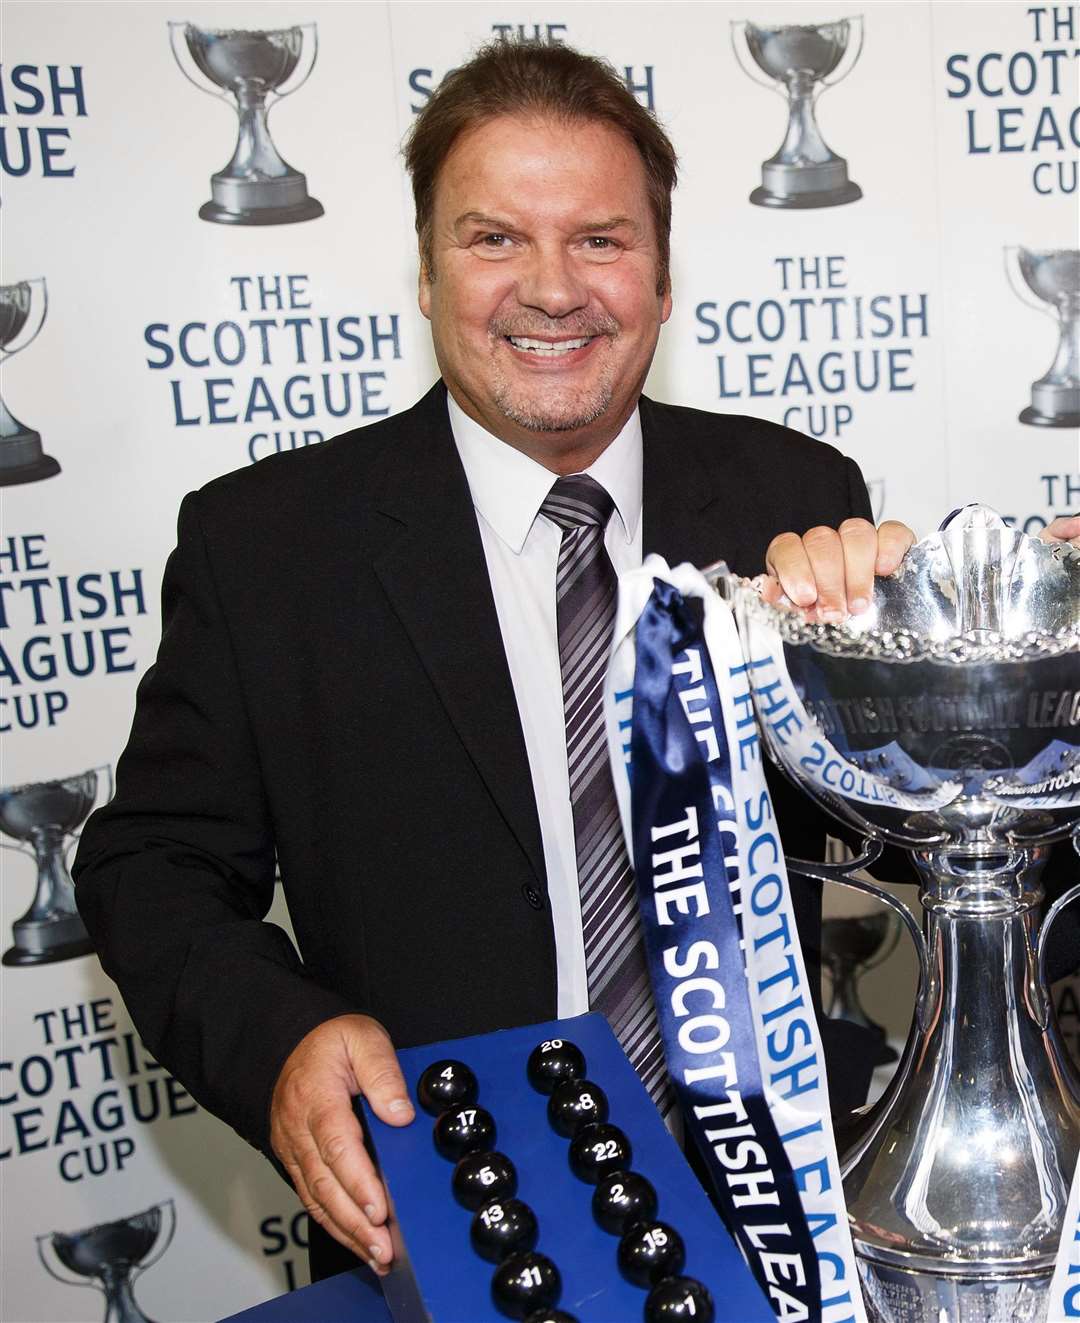 Derek Johnstone won multiple honours during his time as a Rangers player.